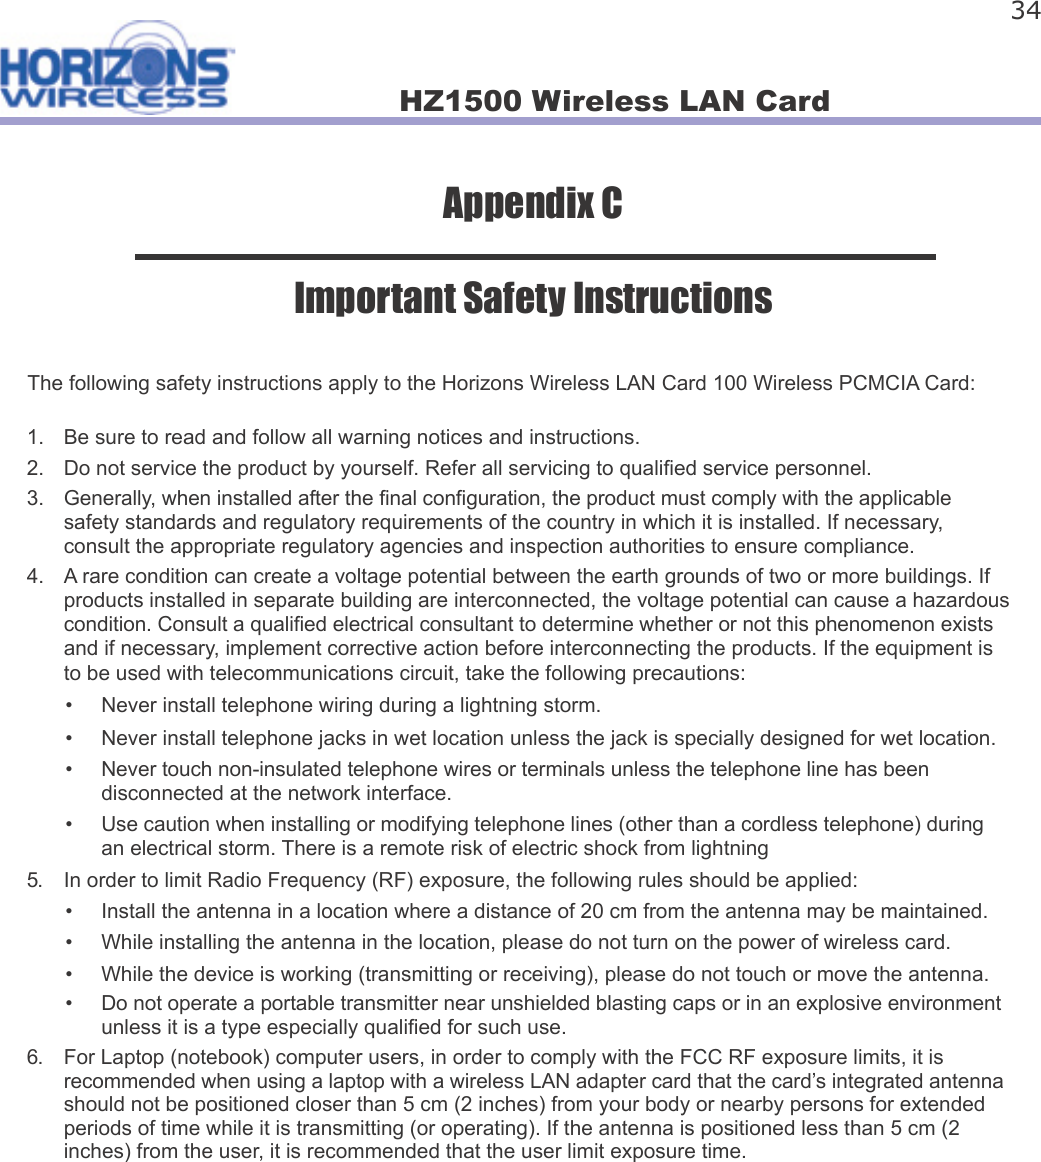 HZ1500 Wireless LAN Card 34Appendix CImportant Safety InstructionsThe following safety instructions apply to the Horizons Wireless LAN Card 100 Wireless PCMCIA Card:1.  Be sure to read and follow all warning notices and instructions.2.  Do not service the product by yourself. Refer all servicing to quali ed service personnel.3.  Generally, when installed after the  nal con guration, the product must comply with the applicablesafety standards and regulatory requirements of the country in which it is installed. If necessary,consult the appropriate regulatory agencies and inspection authorities to ensure compliance.4.  A rare condition can create a voltage potential between the earth grounds of two or more buildings. Ifproducts installed in separate building are interconnected, the voltage potential can cause a hazardouscondition. Consult a quali ed electrical consultant to determine whether or not this phenomenon existsand if necessary, implement corrective action before interconnecting the products. If the equipment isto be used with telecommunications circuit, take the following precautions:•  Never install telephone wiring during a lightning storm.•  Never install telephone jacks in wet location unless the jack is specially designed for wet location.•  Never touch non-insulated telephone wires or terminals unless the telephone line has beendisconnected at the network interface.•  Use caution when installing or modifying telephone lines (other than a cordless telephone) duringan electrical storm. There is a remote risk of electric shock from lightning5.  In order to limit Radio Frequency (RF) exposure, the following rules should be applied:•  Install the antenna in a location where a distance of 20 cm from the antenna may be maintained.•  While installing the antenna in the location, please do not turn on the power of wireless card.•  While the device is working (transmitting or receiving), please do not touch or move the antenna.•  Do not operate a portable transmitter near unshielded blasting caps or in an explosive environmentunless it is a type especially quali ed for such use.6.  For Laptop (notebook) computer users, in order to comply with the FCC RF exposure limits, it isrecommended when using a laptop with a wireless LAN adapter card that the card’s integrated antennashould not be positioned closer than 5 cm (2 inches) from your body or nearby persons for extendedperiods of time while it is transmitting (or operating). If the antenna is positioned less than 5 cm (2inches) from the user, it is recommended that the user limit exposure time.